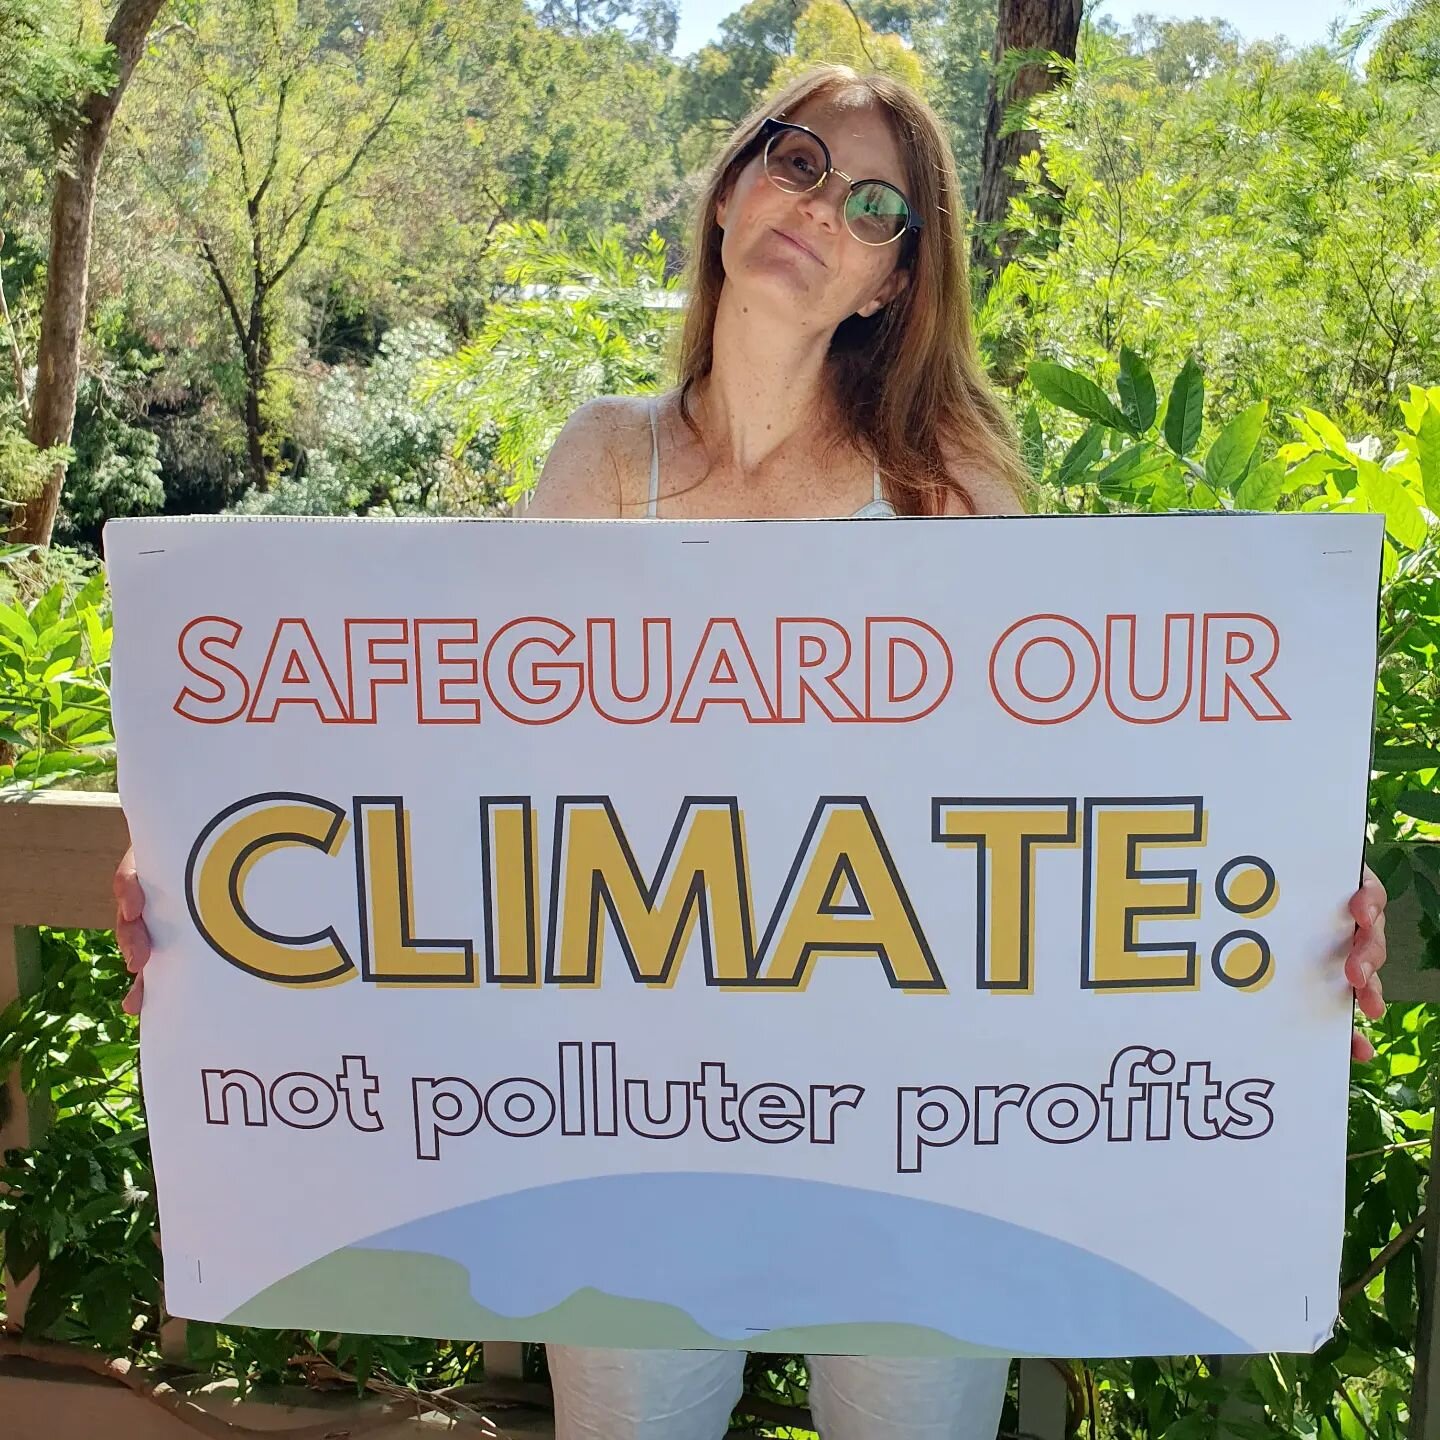 Please Safeguard Our Climate, NOT protect polluter profits @albomp @chrisbowenmp!
.
The Climate Safeguard Mechanism reform needs to be used to enforce deep emissions cuts on the #dirtydozenpolluters. If they are allowed to use unlimited &lsquo;offset